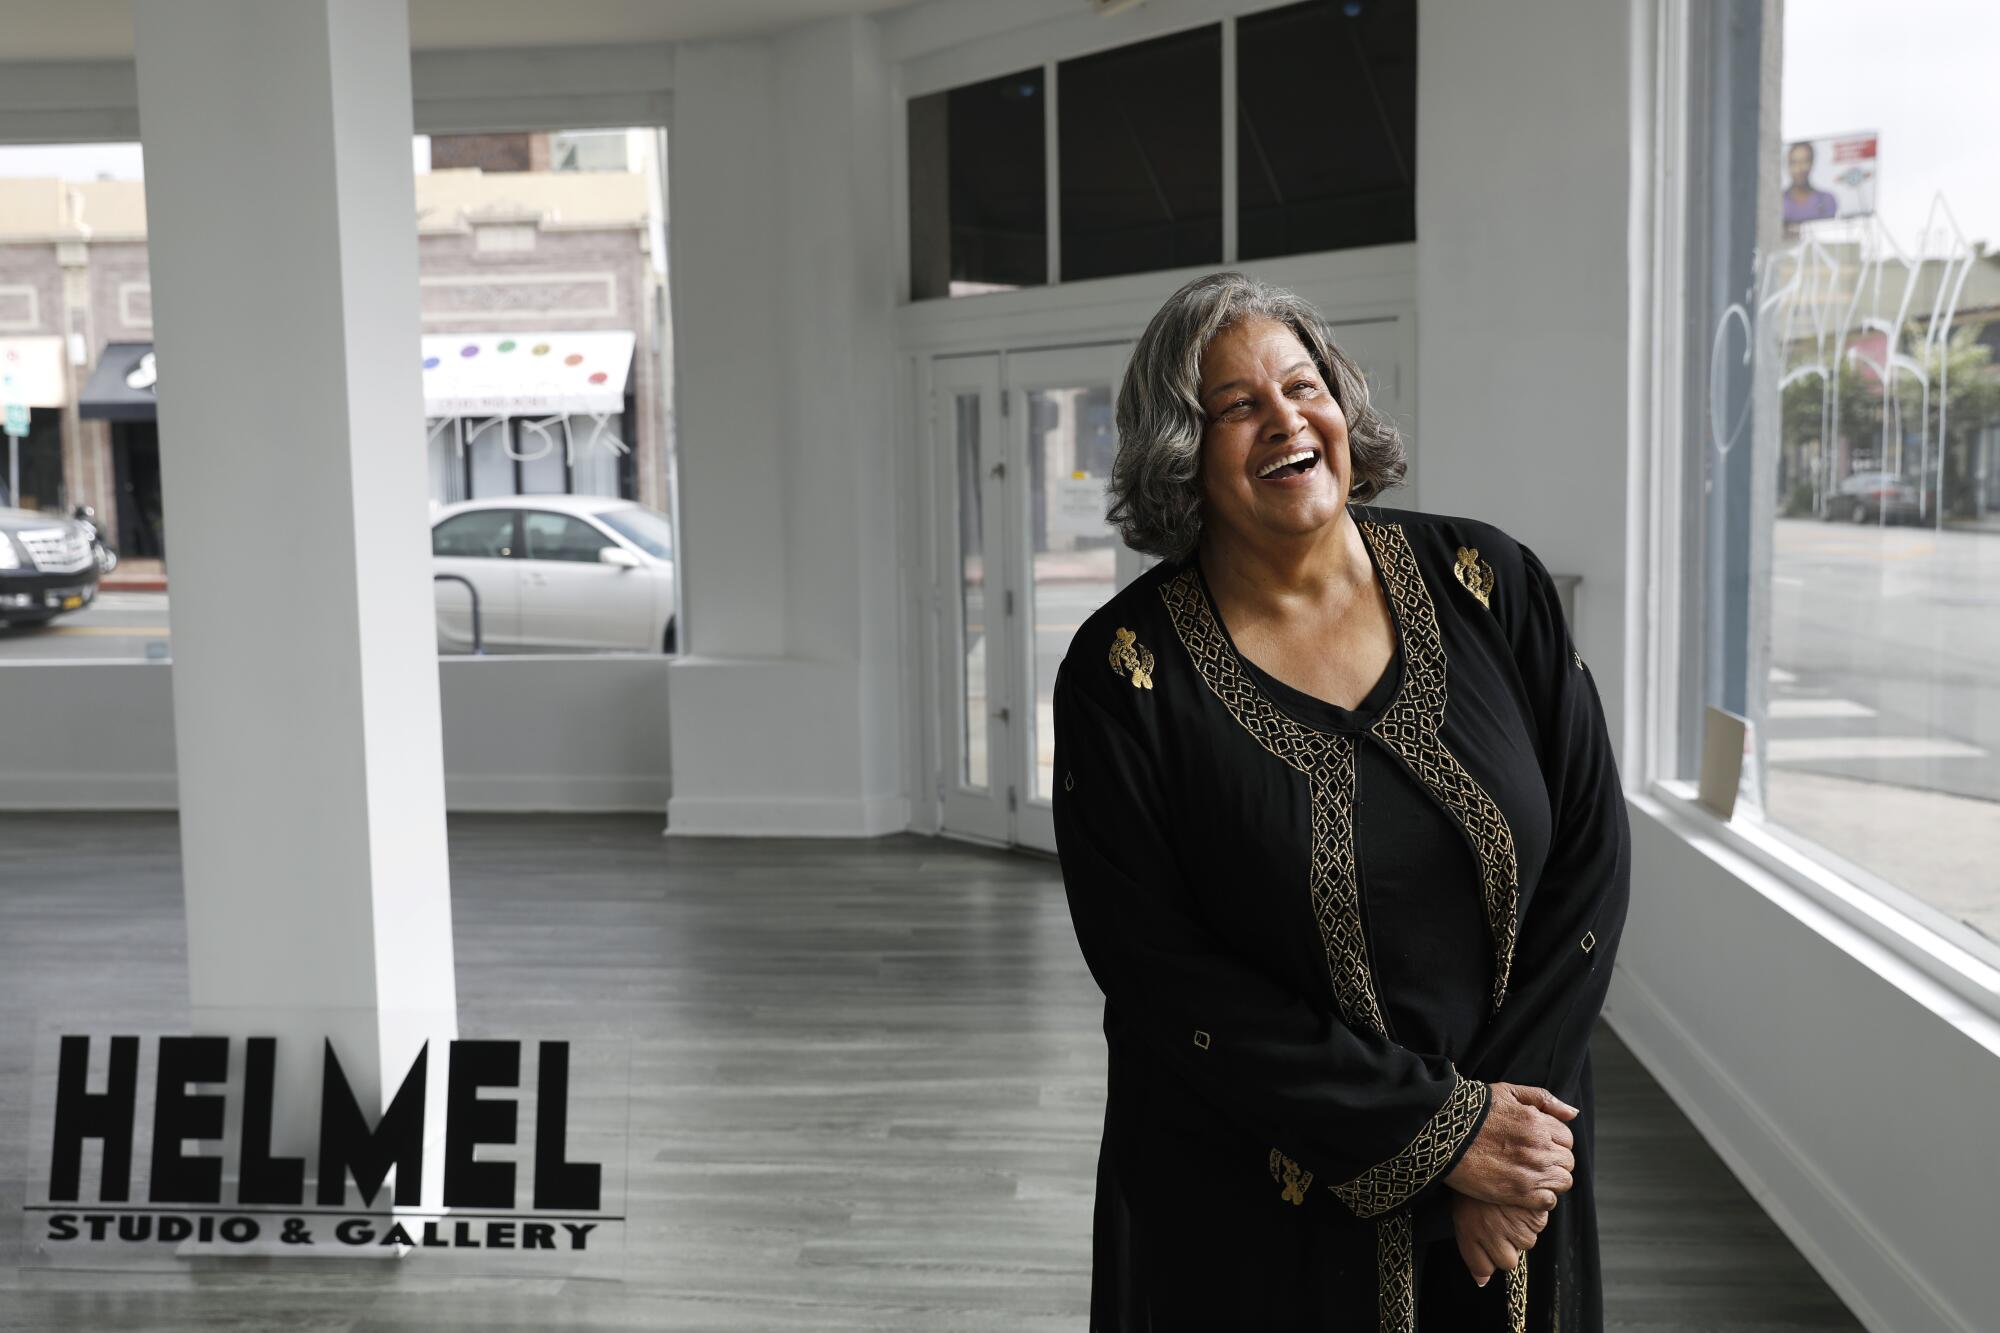 A woman with gray hair and a black dress laughs inside an empty art studio